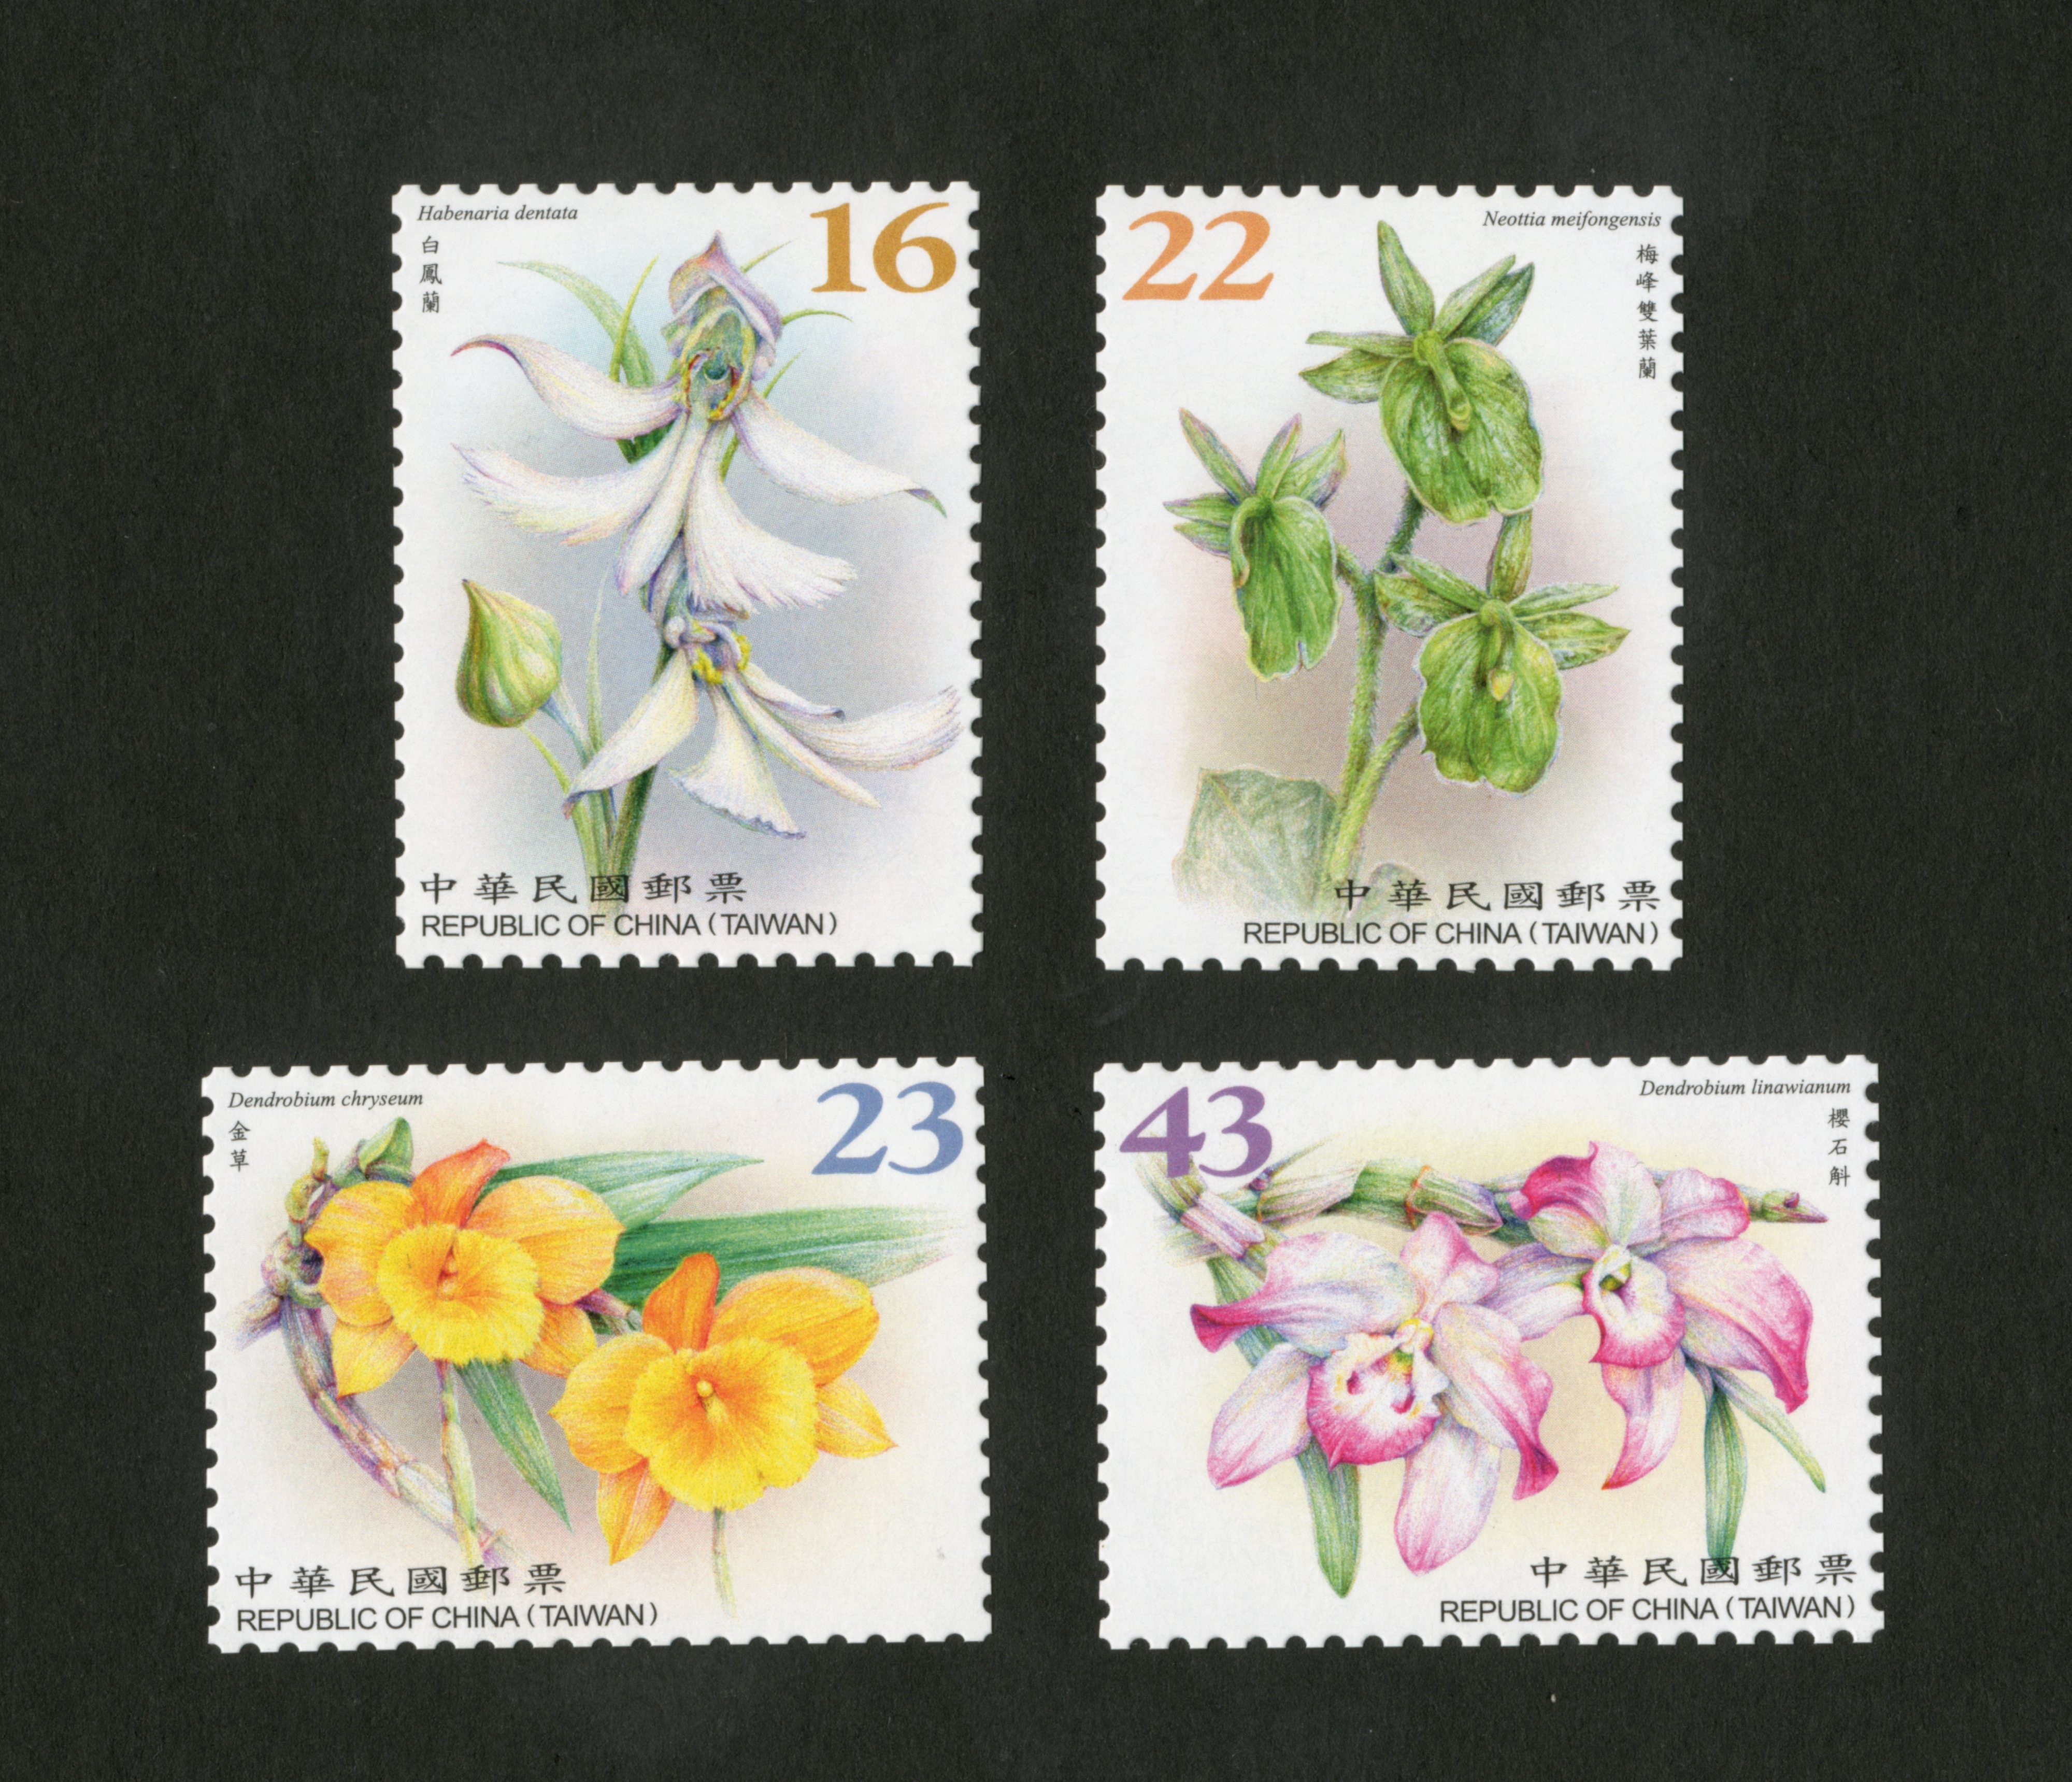 Wild Orchids of Taiwan Postage Stamps (Continued II)